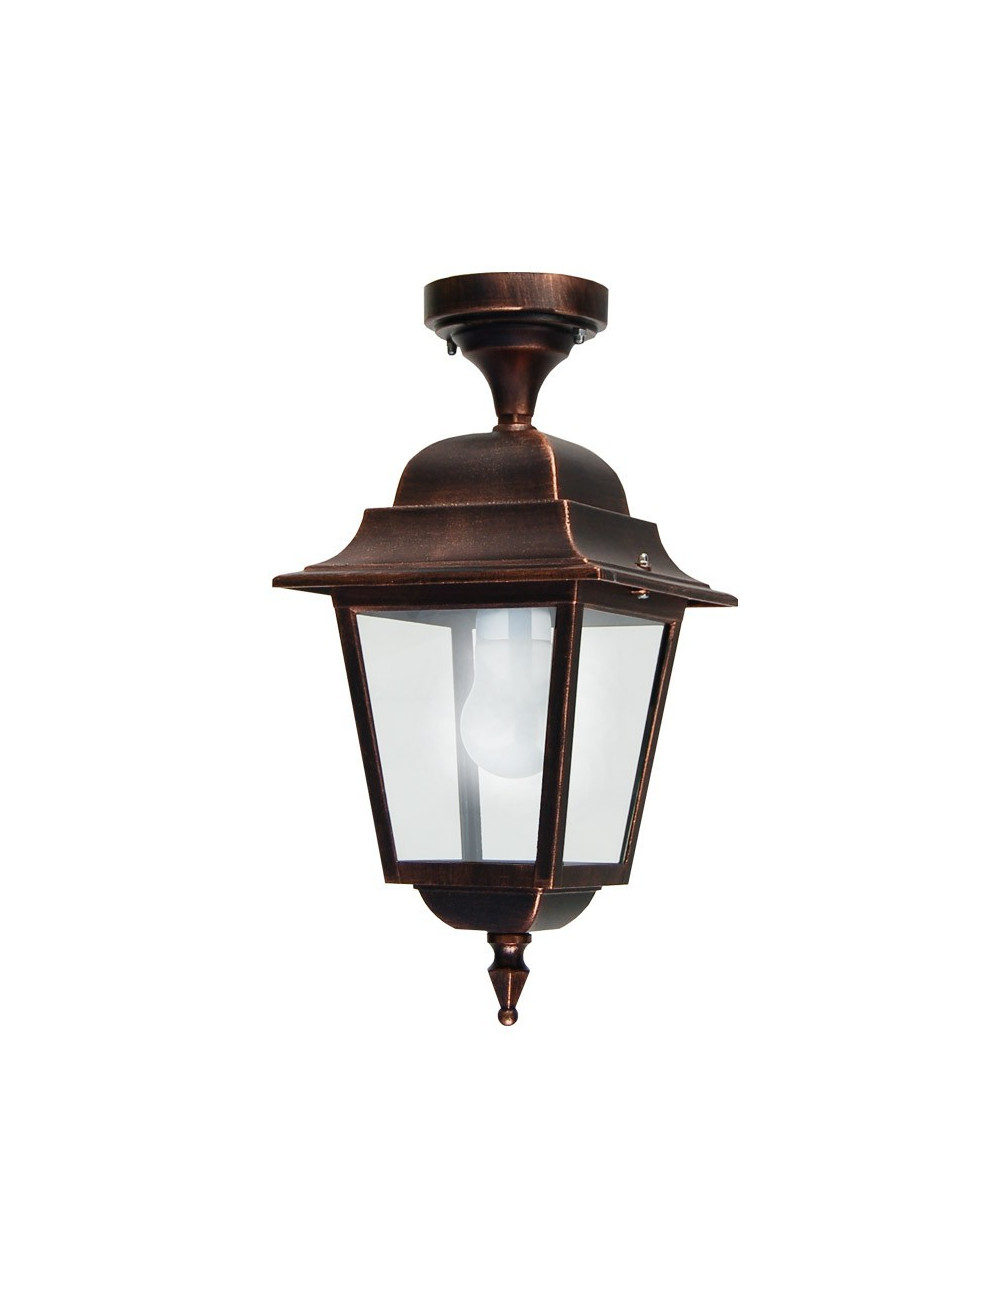 ATHENA Ceiling lamp Classic Square Ceiling Lamp Outdoor Lighting